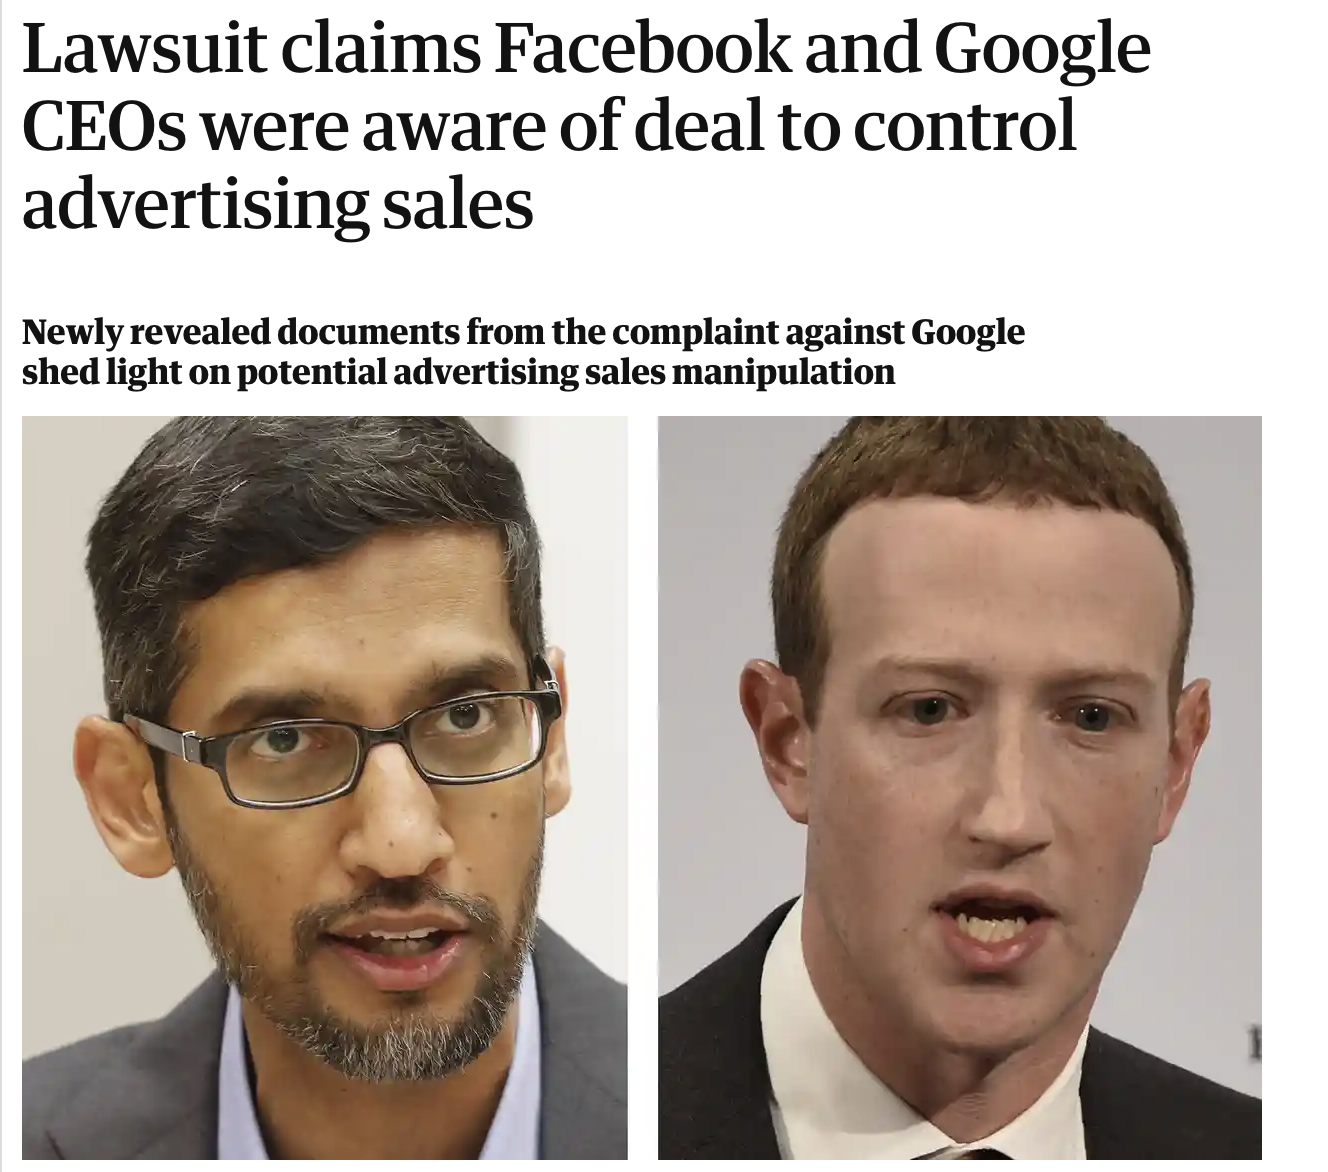 "Lawsuit claims Facebook and Google CEOs were aware of deal to control advertising sales